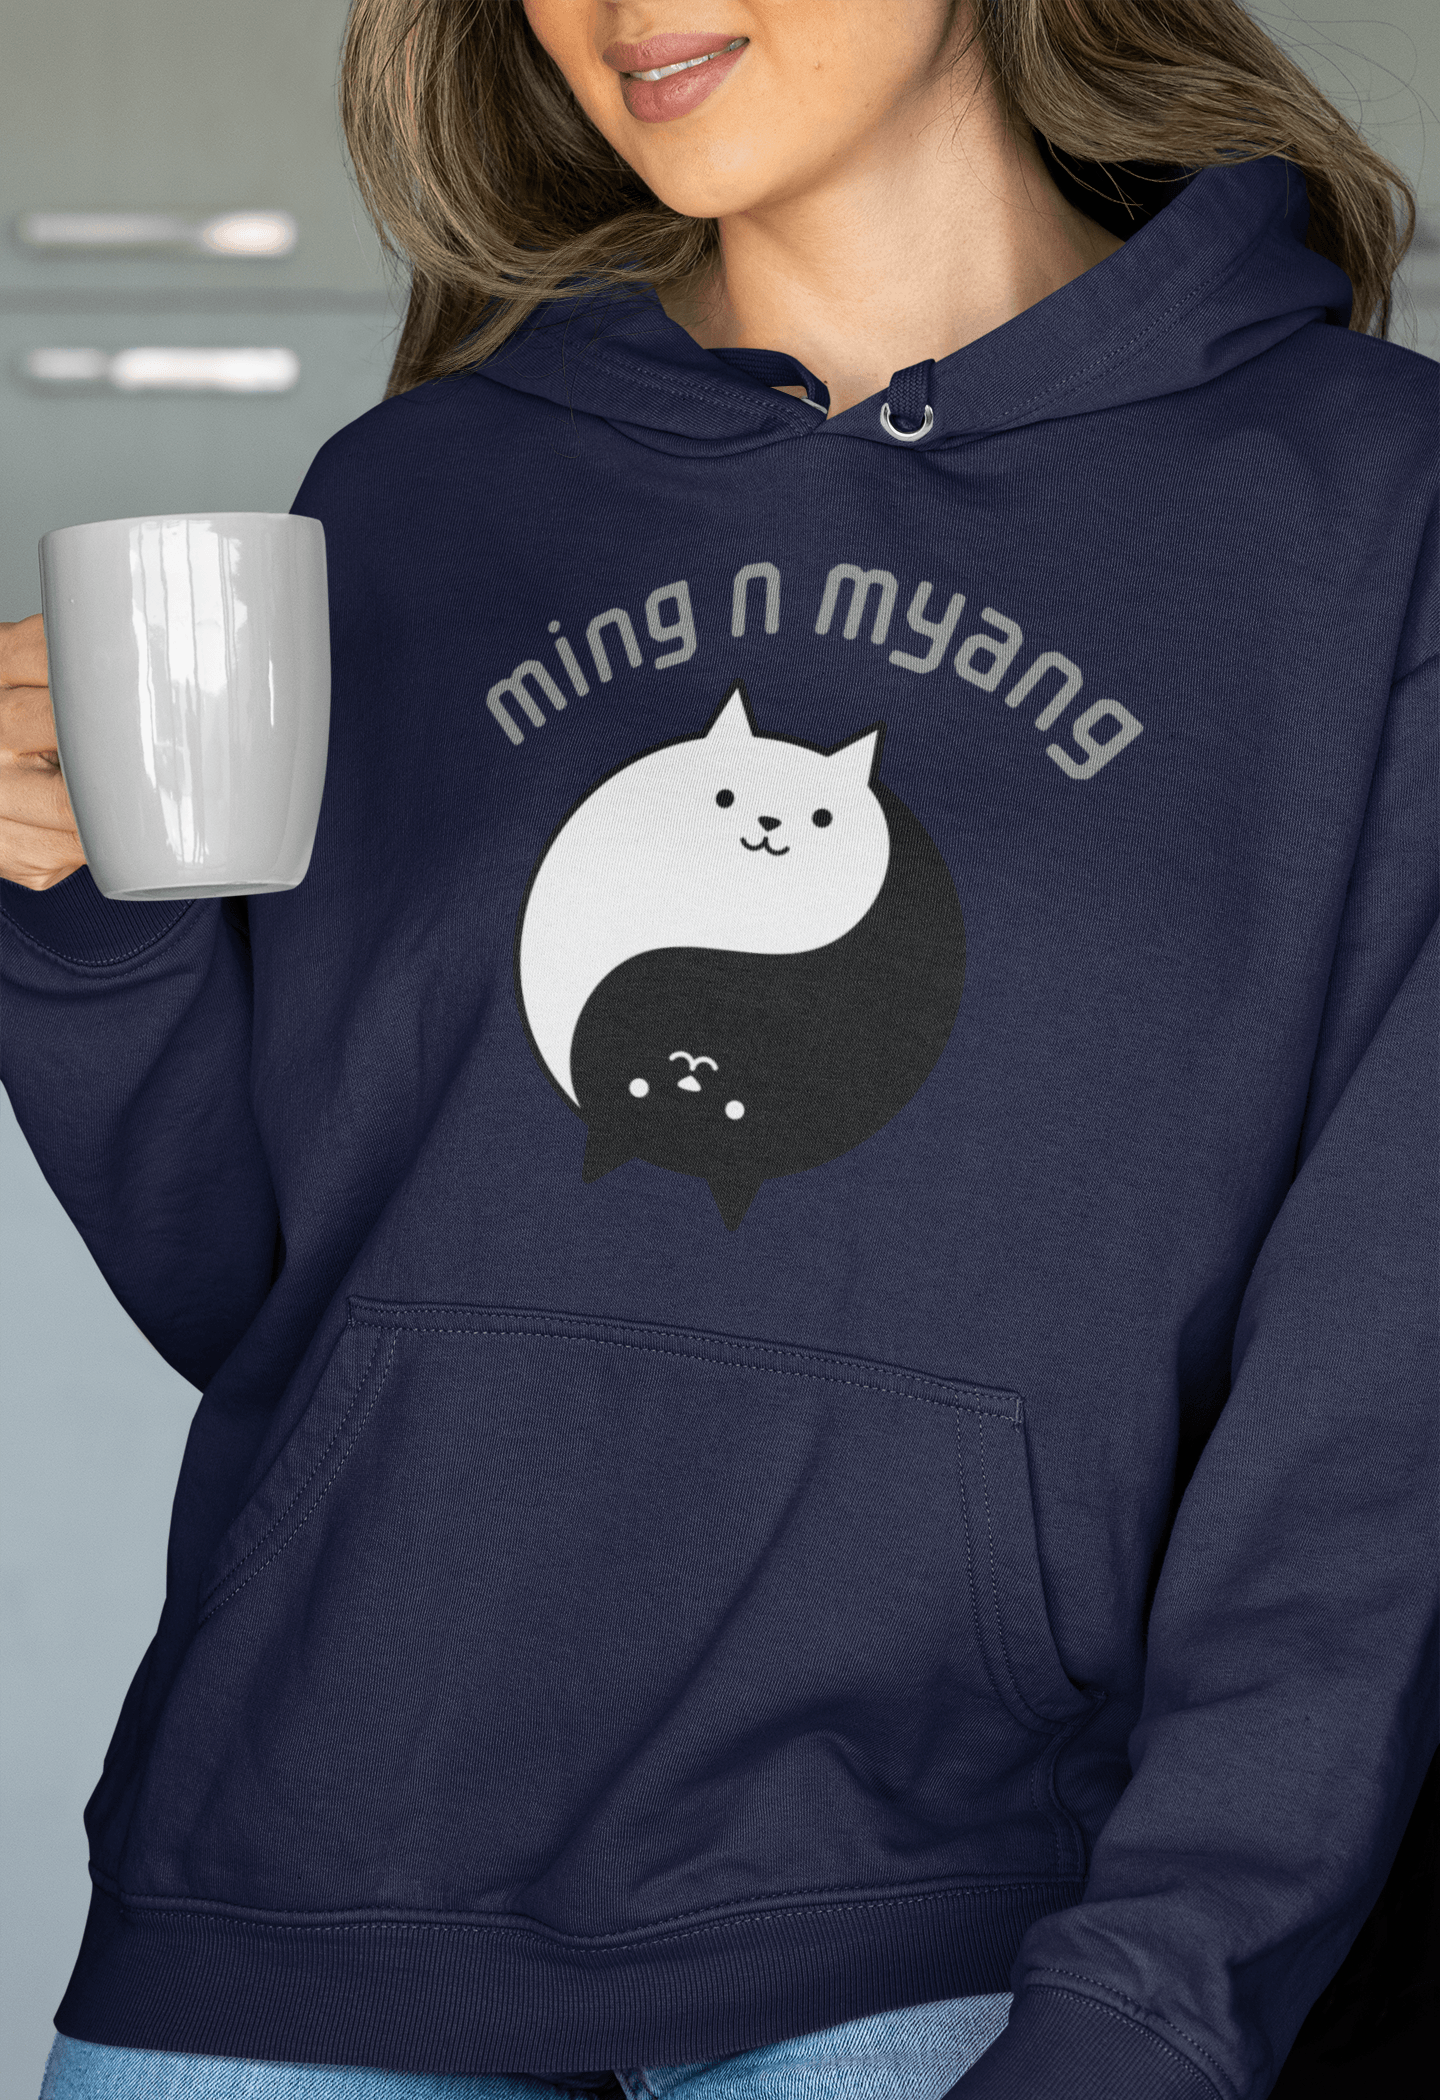 Ming Myang Hooded Sweatshirt - The Accessorys Official